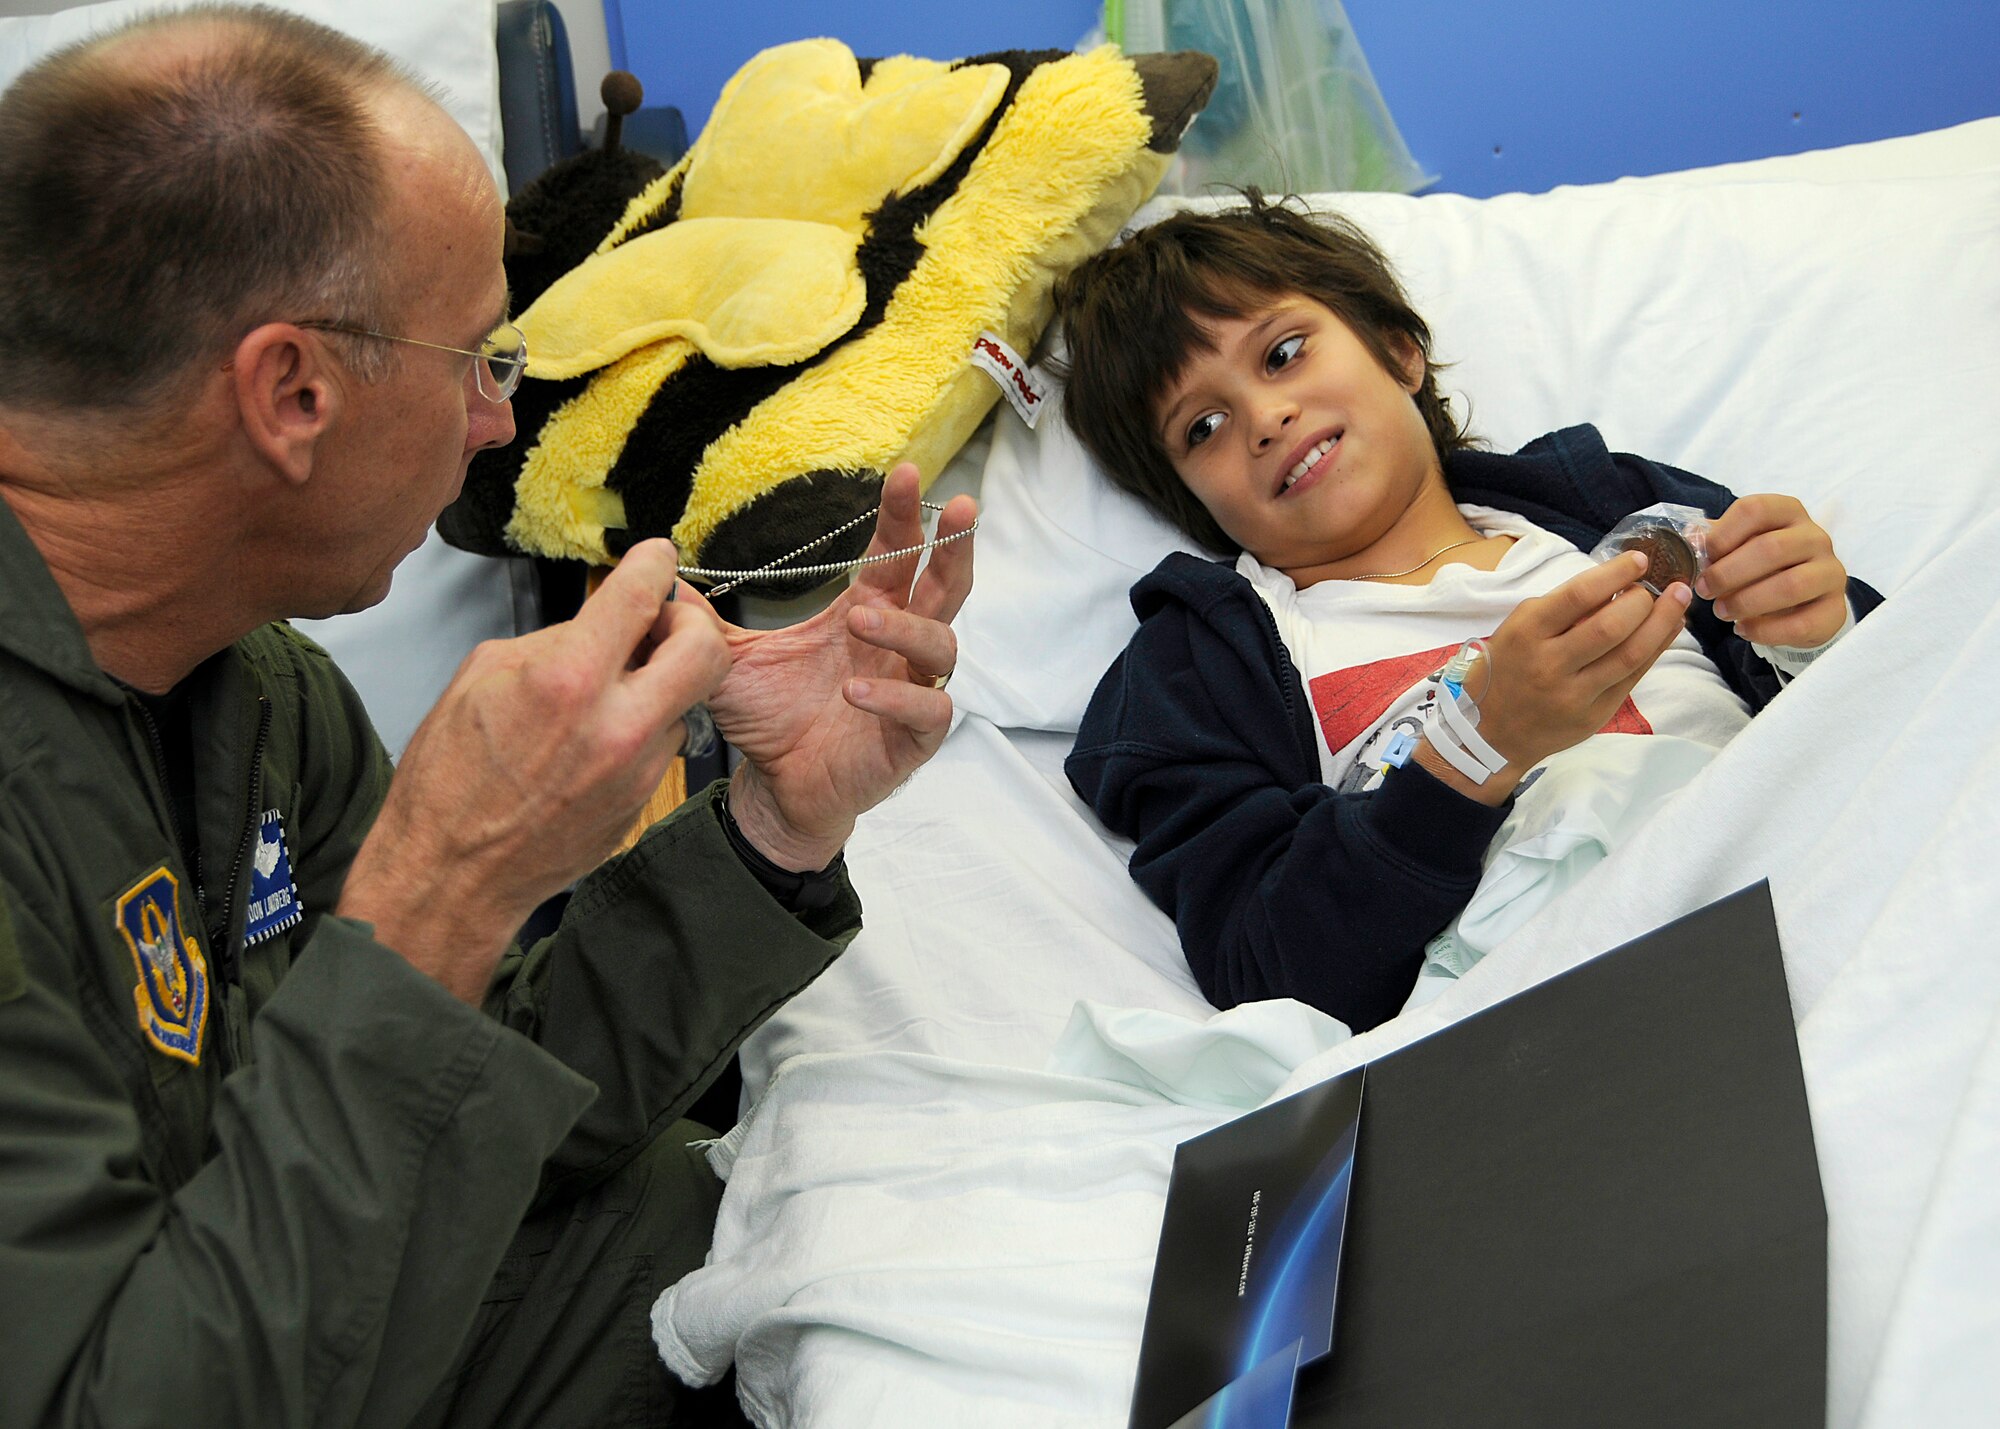 Colonel Donald R. Lindberg, Homestead Air Reserve Base commander, met  children and passed out gifts while at Miami Childrens Hospital Aug. 11th and extended  personal invitation to the 2010 Wings Over Homestead Air Show. Col Lindberg was one of 28 Commanders from 10th Air Force who participated in a two day seminar on the Lean system, a managerial process designed to help identify waste, at the Homestead Air Reserve Base and Children's Hospital.
